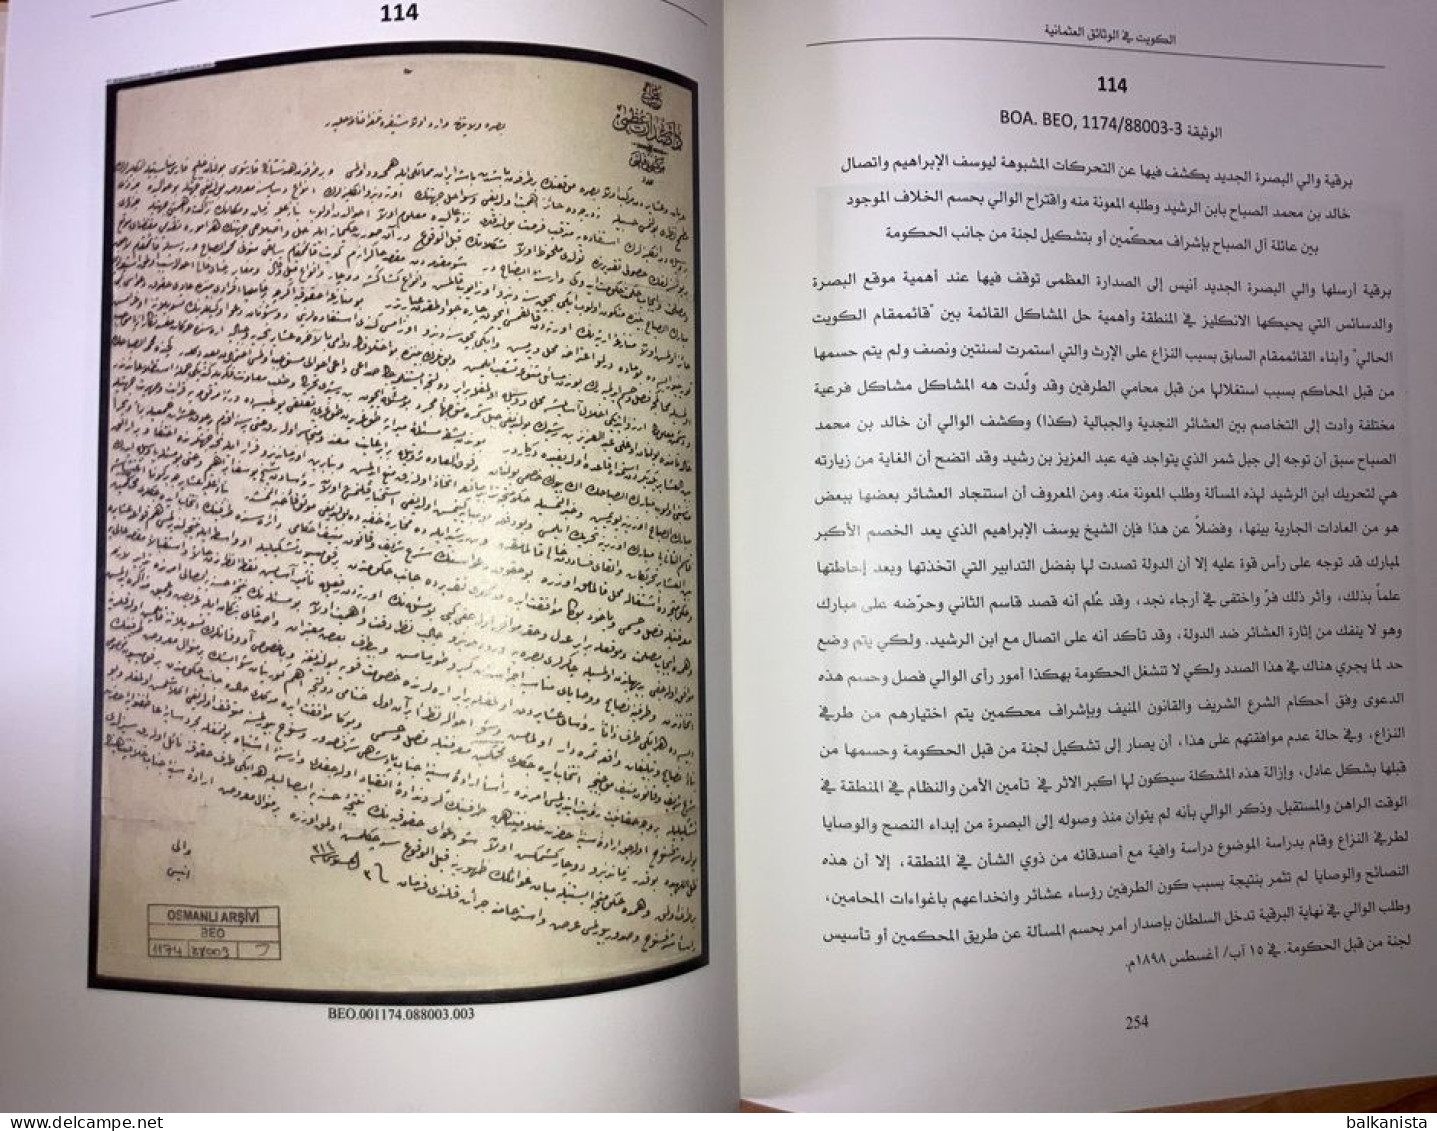 Kuwait In The Ottoman Archive Documents